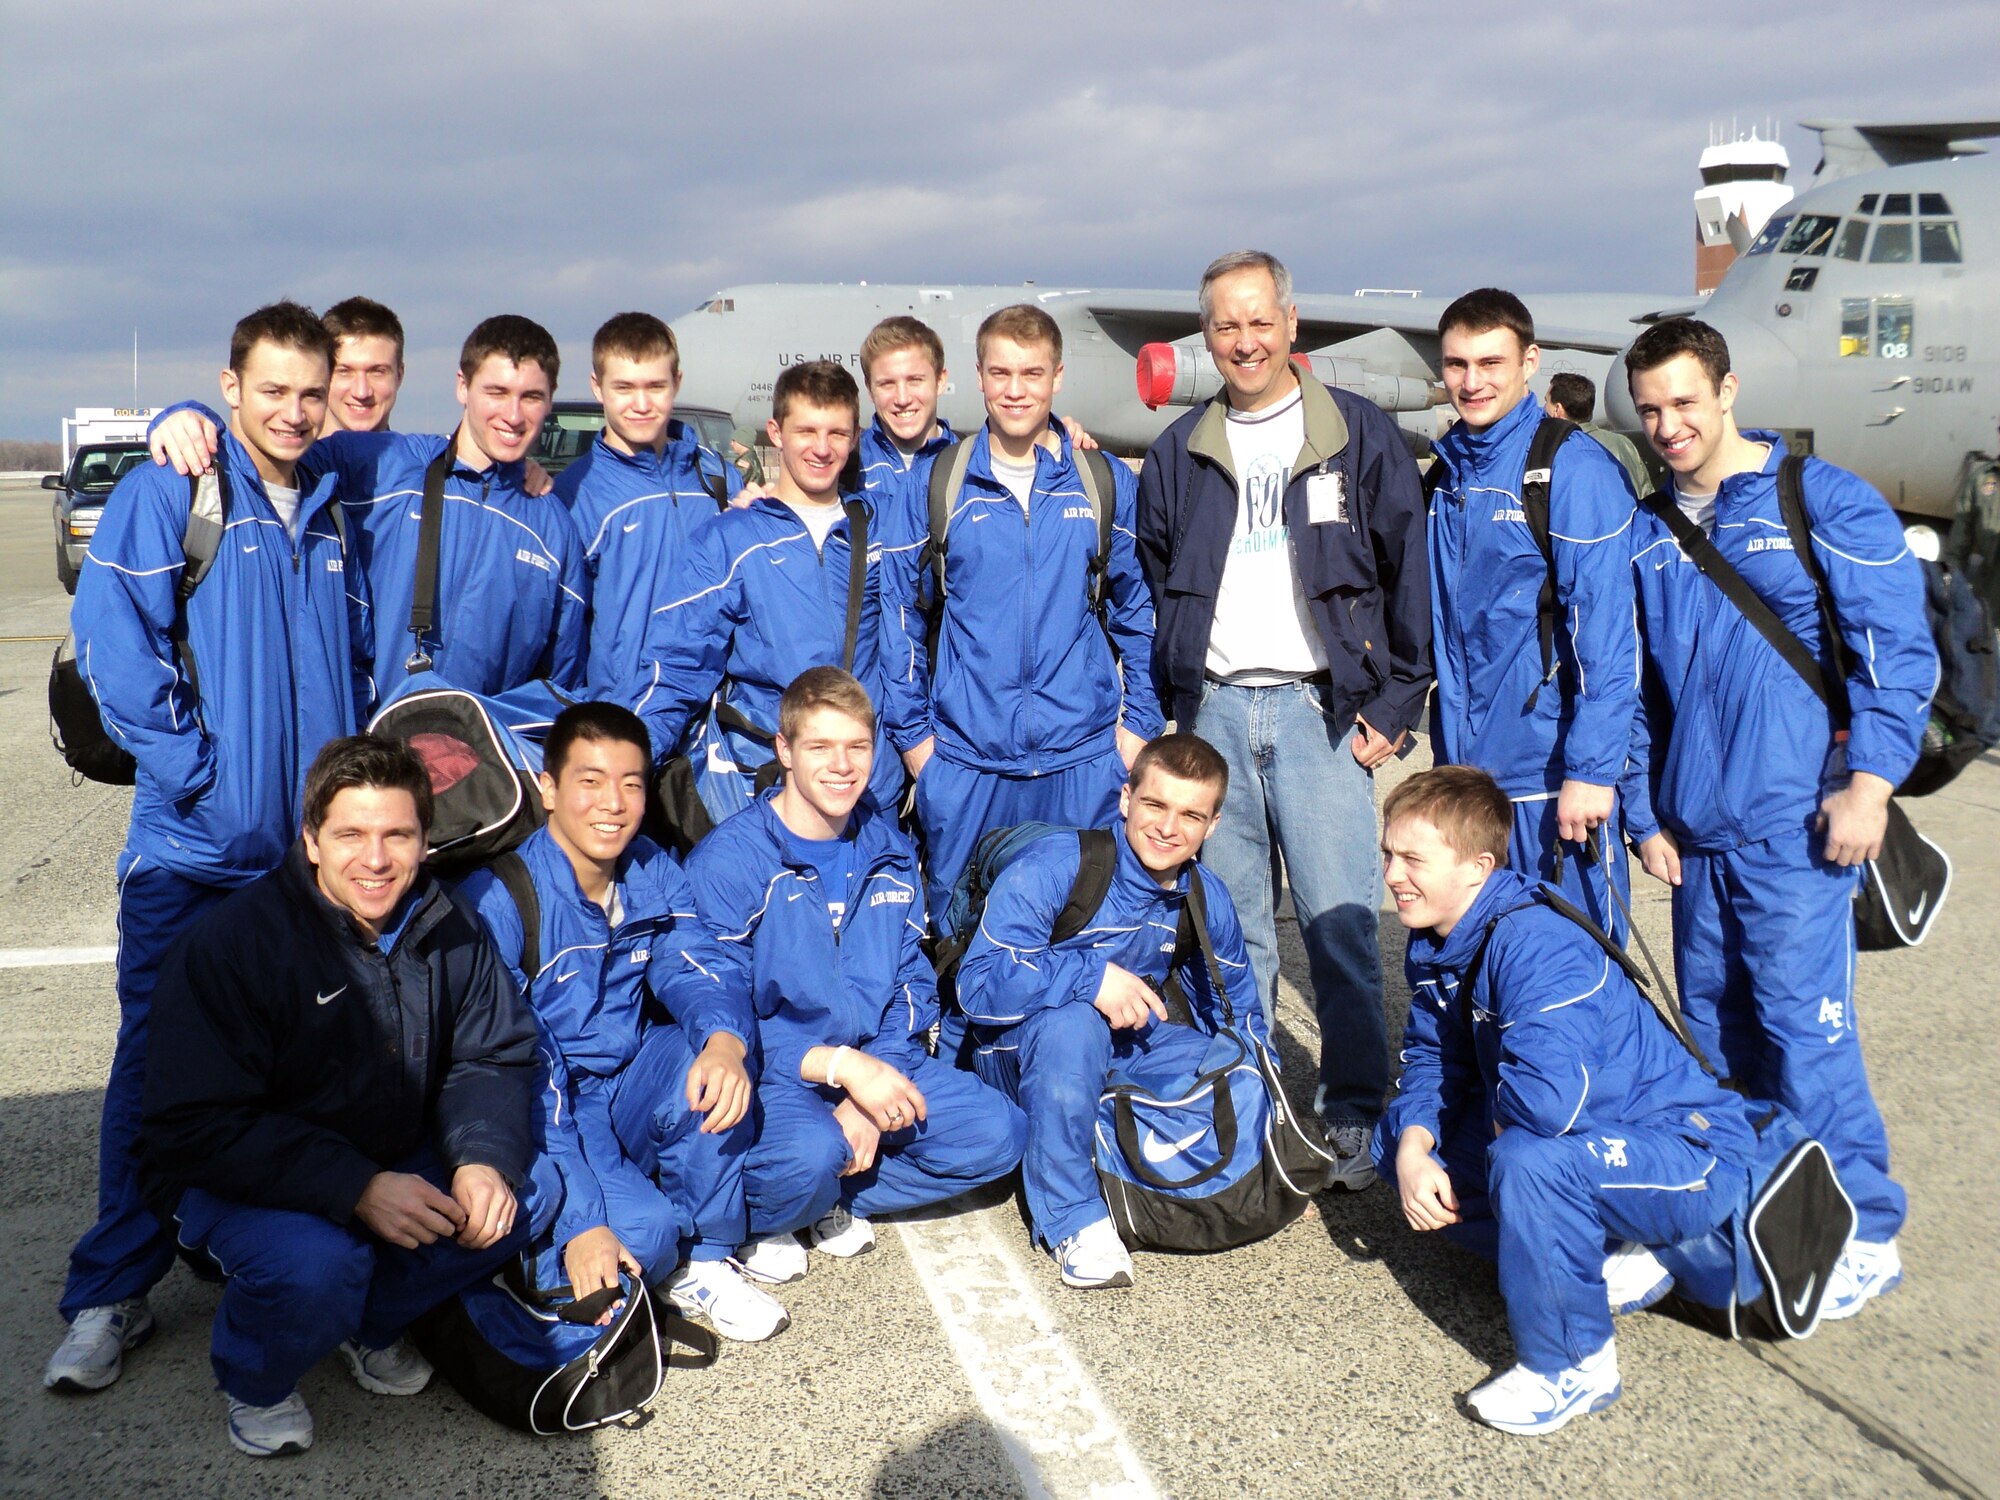 The Air Force Academy Men's Gymnastics Team gather with 439th Airlift Wing Commander Colonel Robert Swain before flying back to Colorado Springs after their team competition against Springfield College at Blake Arena, Springfield College, March 13. The Men's Gymnastics Team is now ranked 10th in the nation. They return to Blake Arena March 23-27 for both individual and team events. They will compete in the U.S. Gymnastics Championships March 25 at 7 p.m. The championship finals occur the following day, March 26, at 7 p.m., also at Blake Arena. (Courtesy photo)
                 